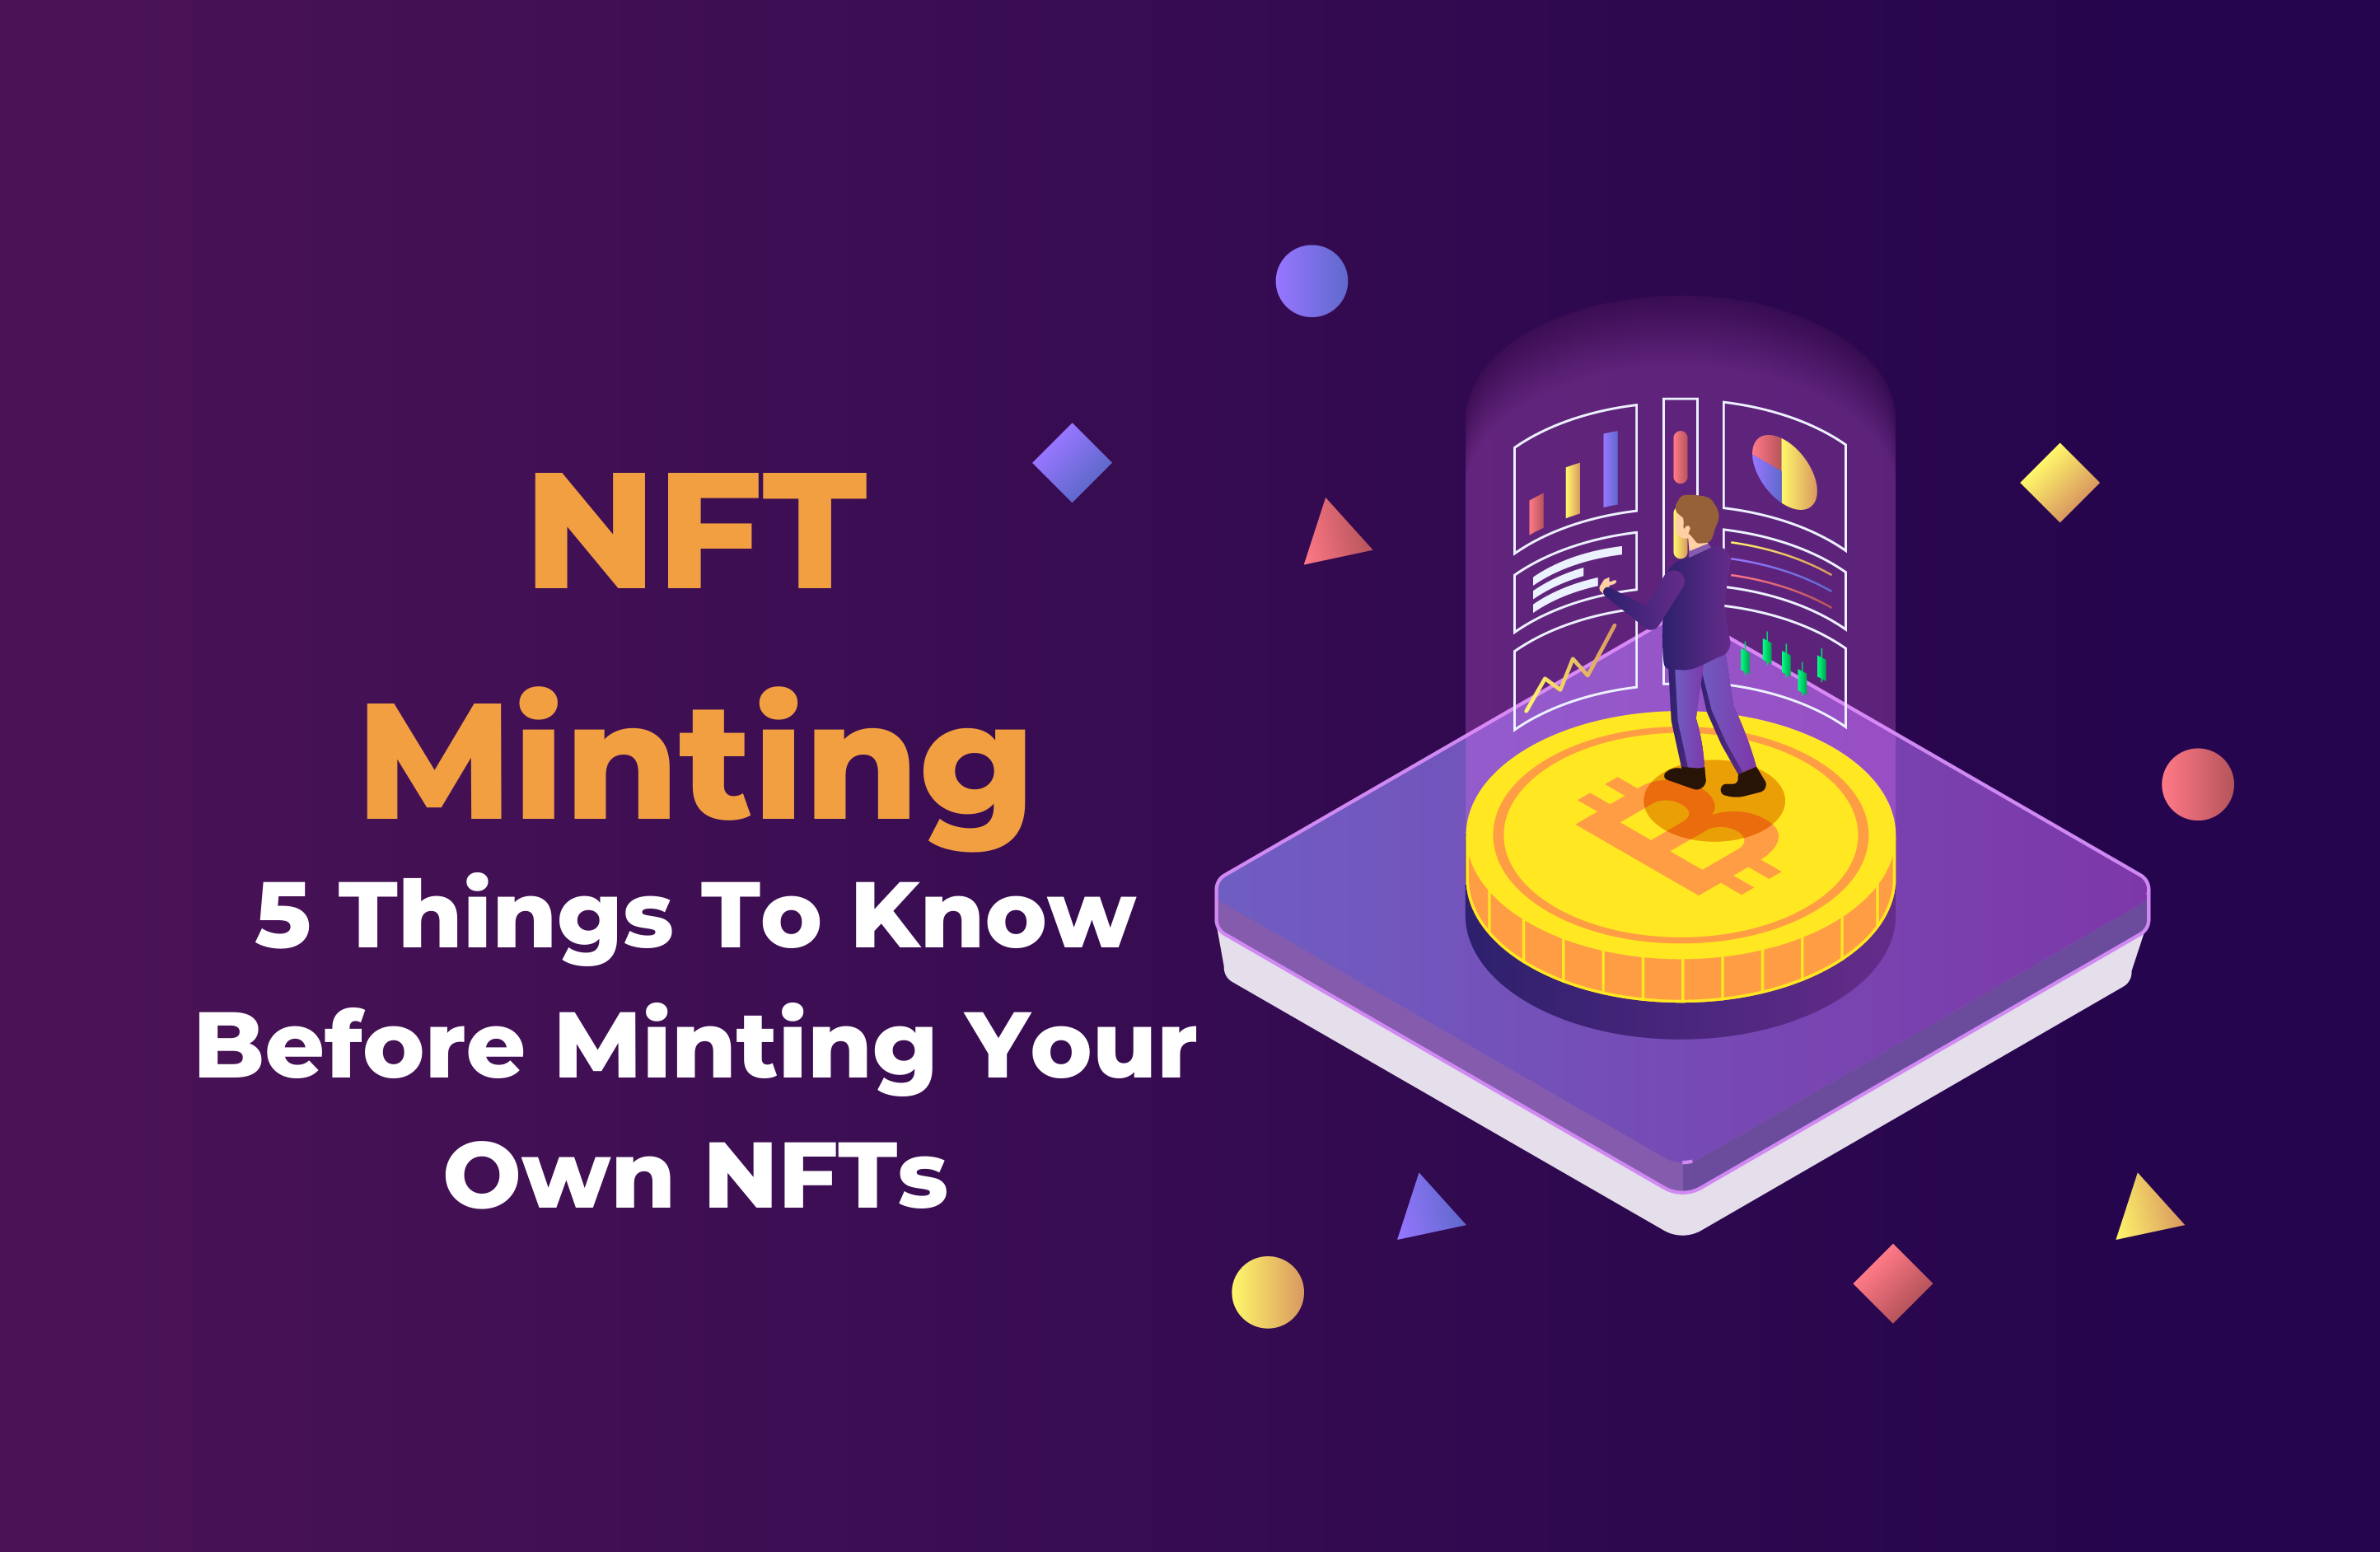 NFT Minting: 5 Things to Know before Minting Your Own NFTs